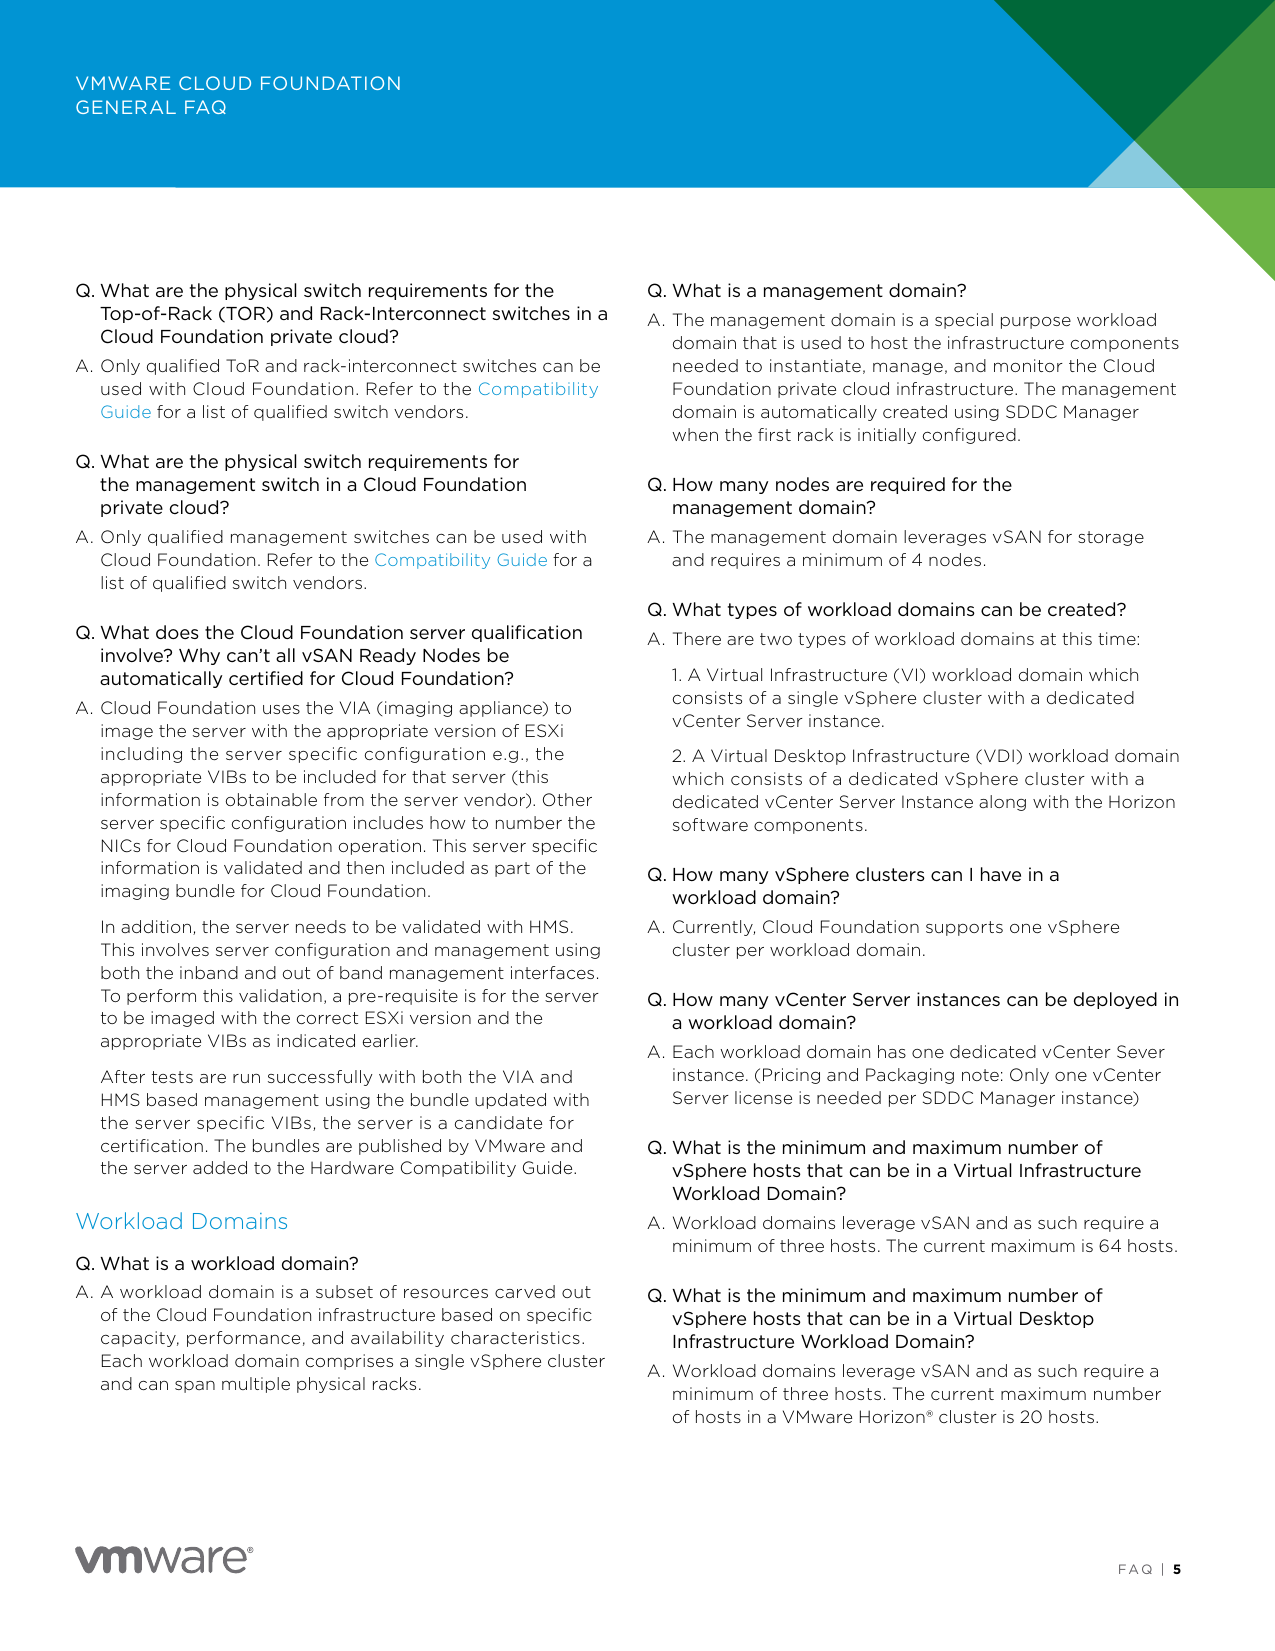 Page 5 of 7 - VMware Cloud Foundation General FAQ Vmware-cloud-foundation-faq